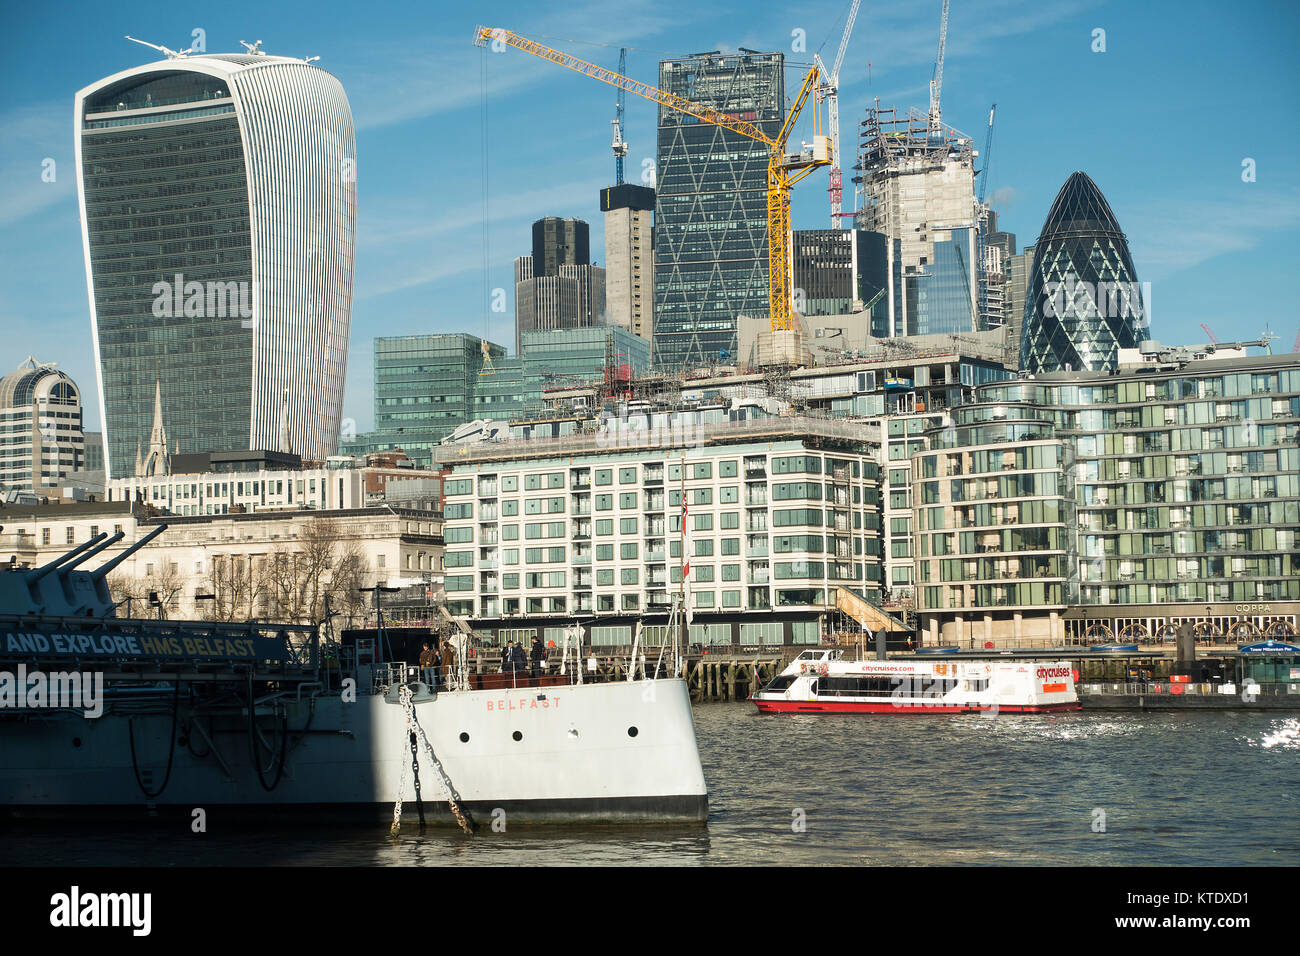 The City of London Skyline with HMS Belfast and the River Thames London England United Kingdom UK Stock Photo